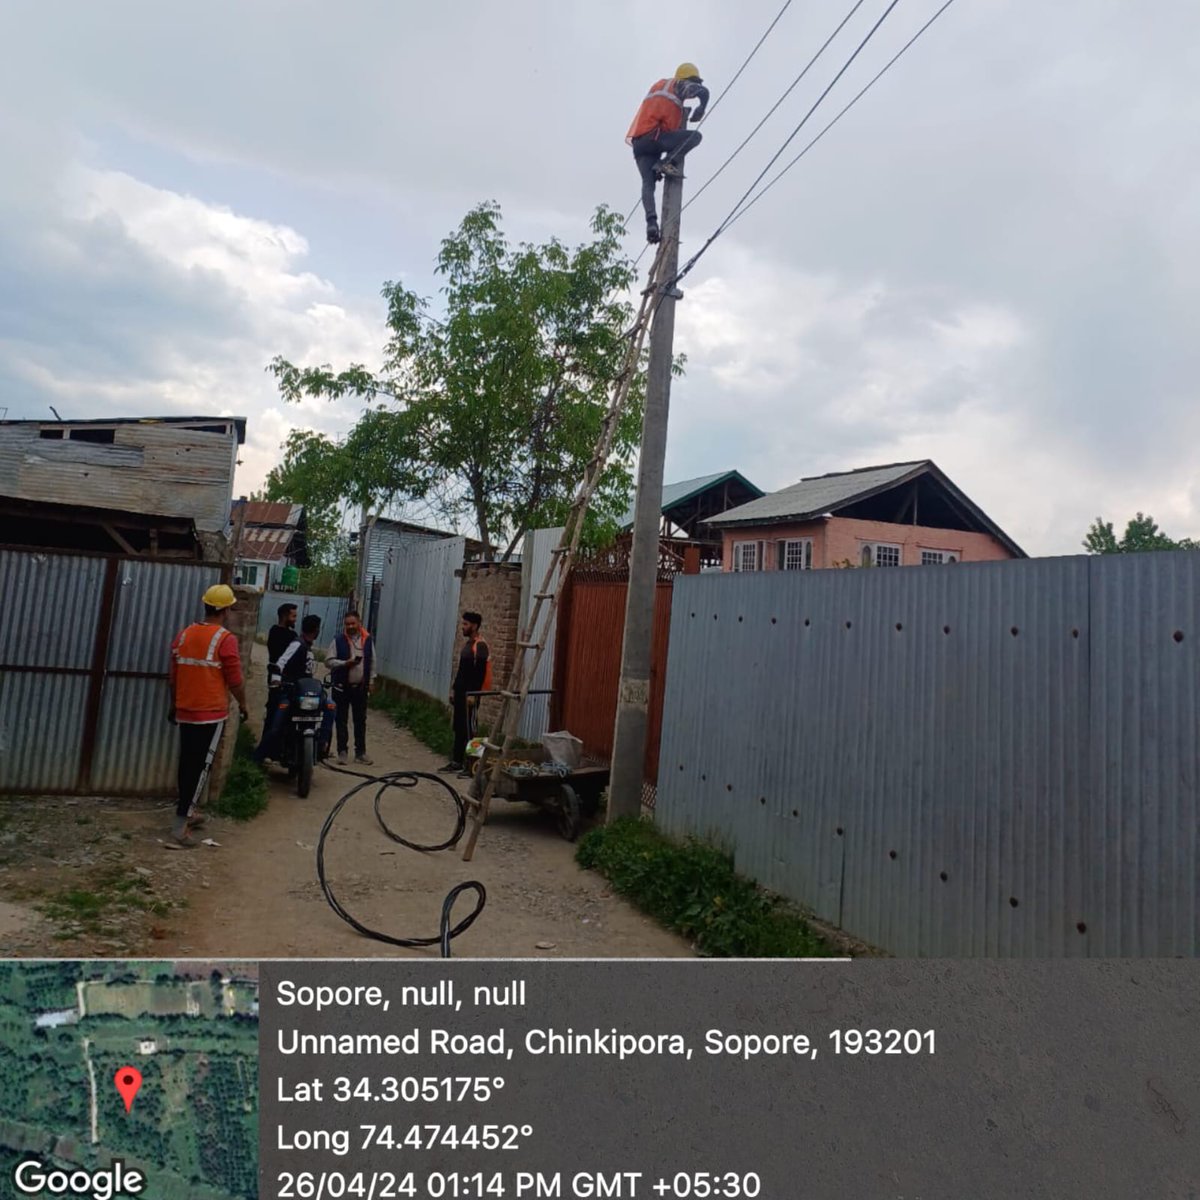 Installation of LT AB Cable in Chinkipora Sopore. Combined with smart metering , it is the journey towards 24*7 uninterrupted Power Supply.
Curbing Pilferages and Reducing losses.
Do co-operate with us in the mission 24*7 Hr Power Supply